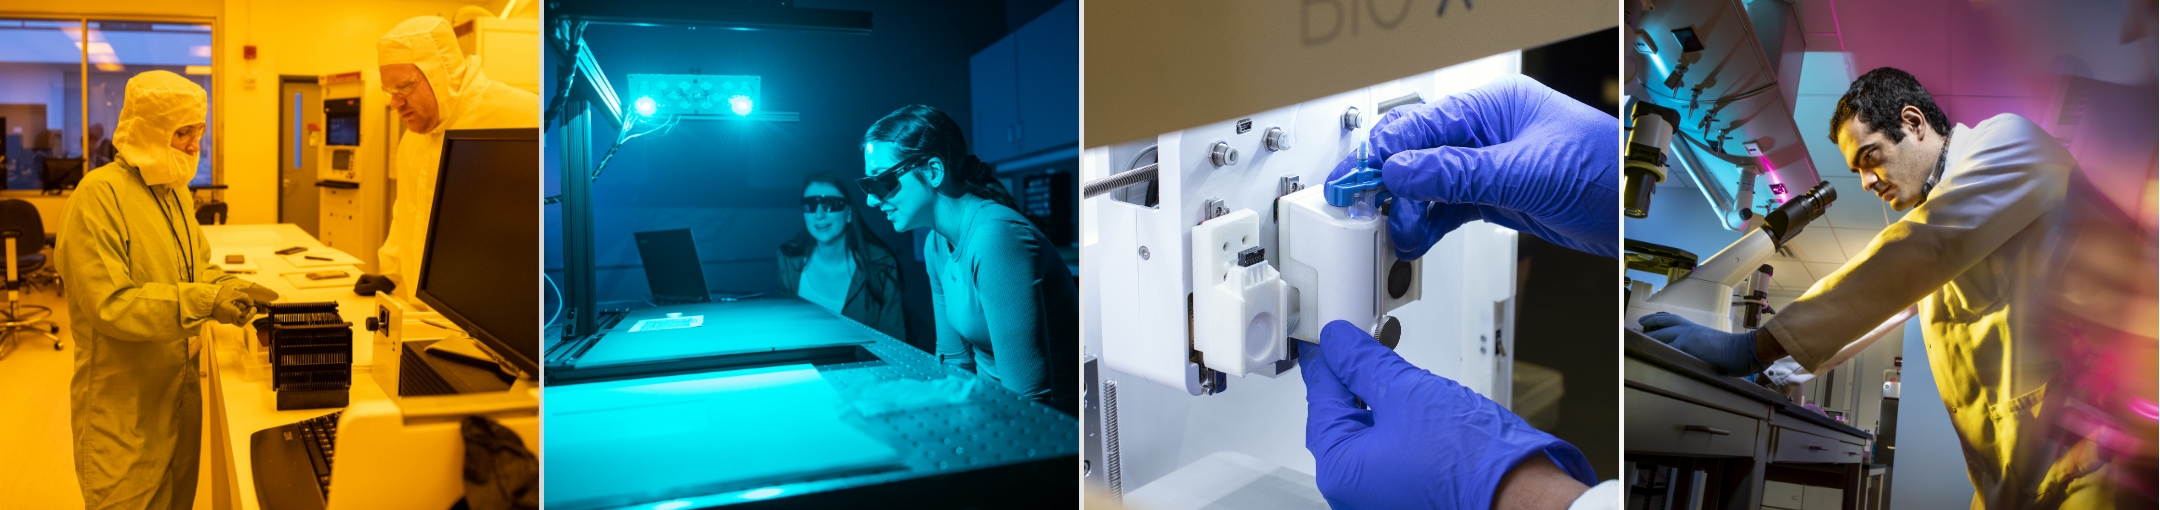 four images side by side first image is of two people in a complete body cover working in a room with yellow light. Second image is of two people sitting in a room wearing protective eye covering in a room bathed in blue light. Third image is off a pair of hands wearing purple latex gloves while working with a machine. Fourth image is of a person looking into the eye holes of a microscope while wearing a white lab coat and latex gloves.